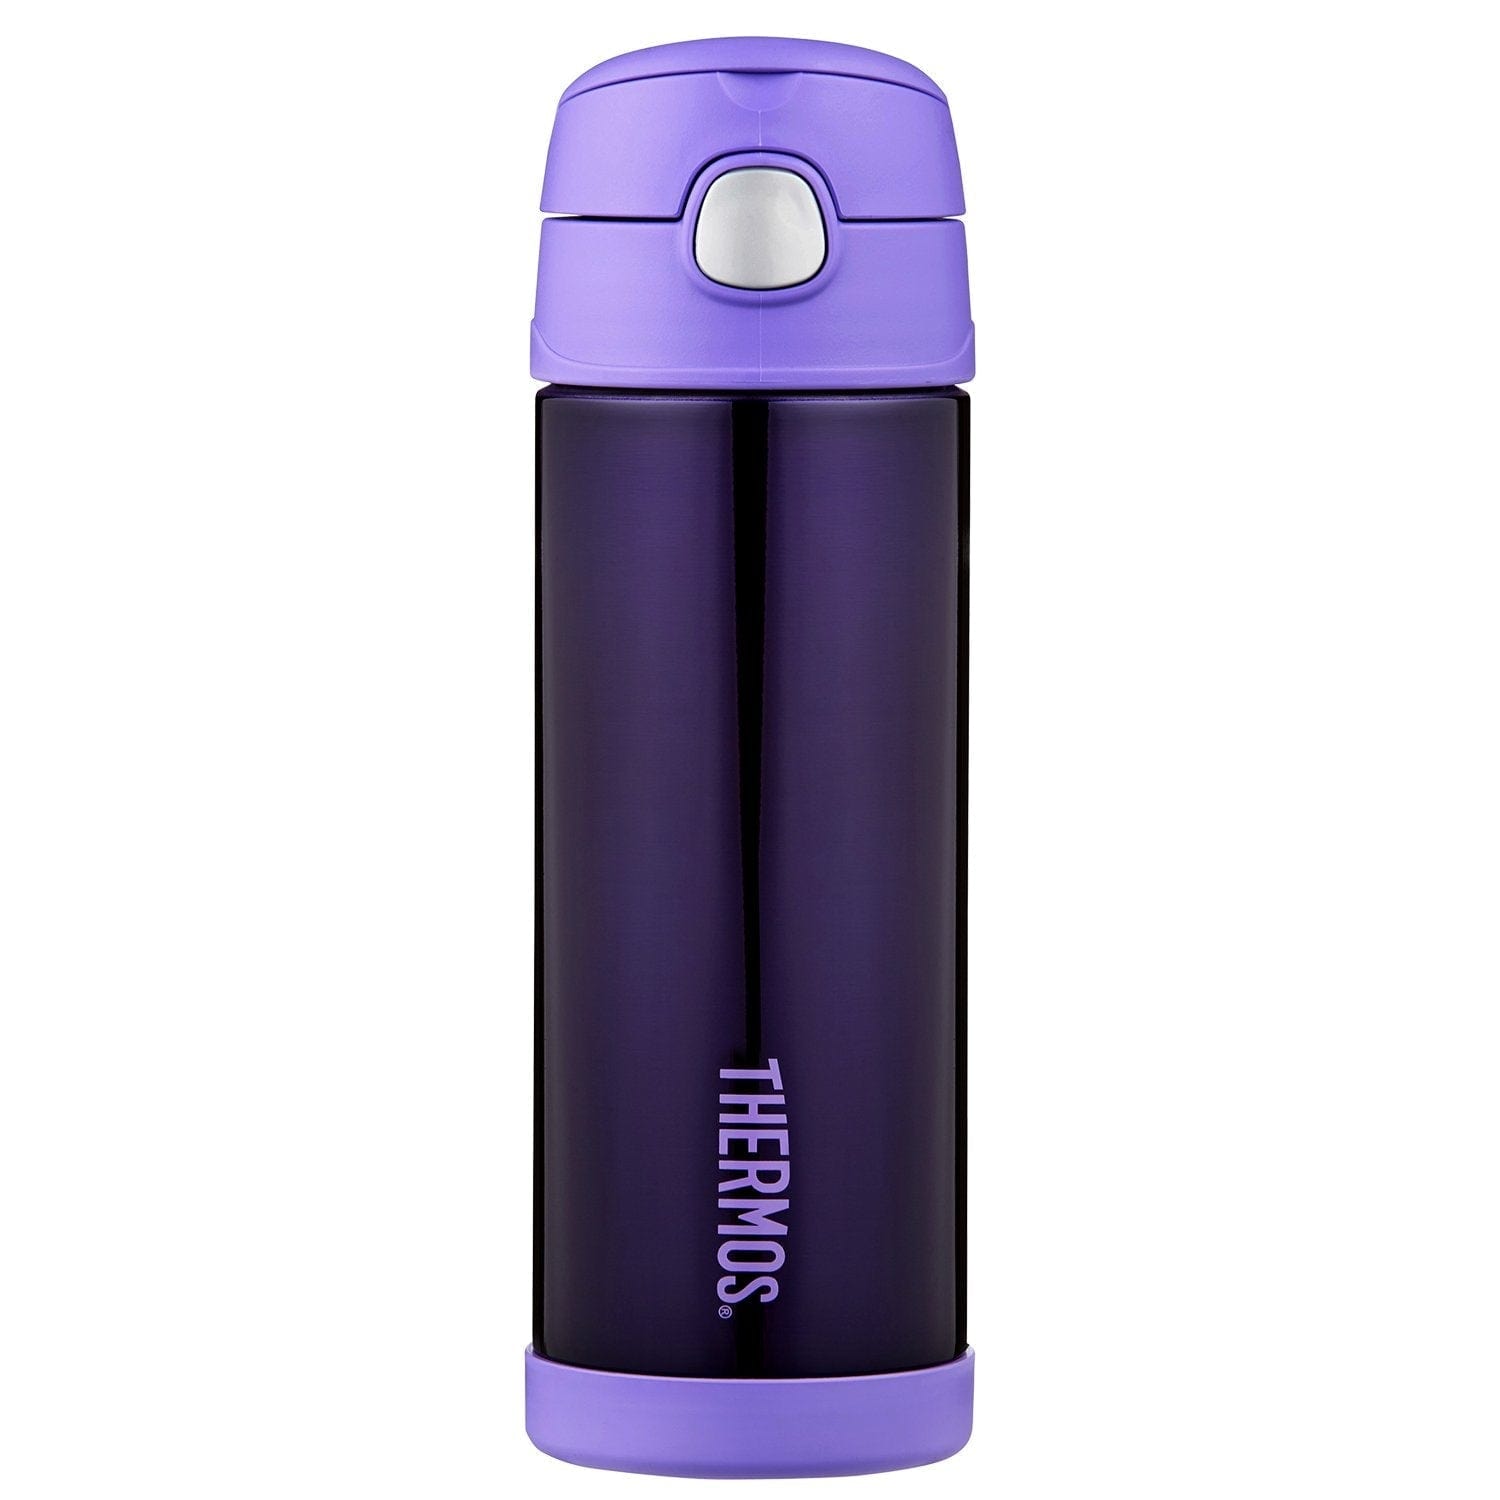 https://cdn.shopify.com/s/files/1/0672/1054/3353/products/thermos-bottles-and-flasks-thermos-funtainer-stainless-steel-vacuum-insulated-bottle-470ml-purple-38034553045241.jpg?v=1669620261&width=1500